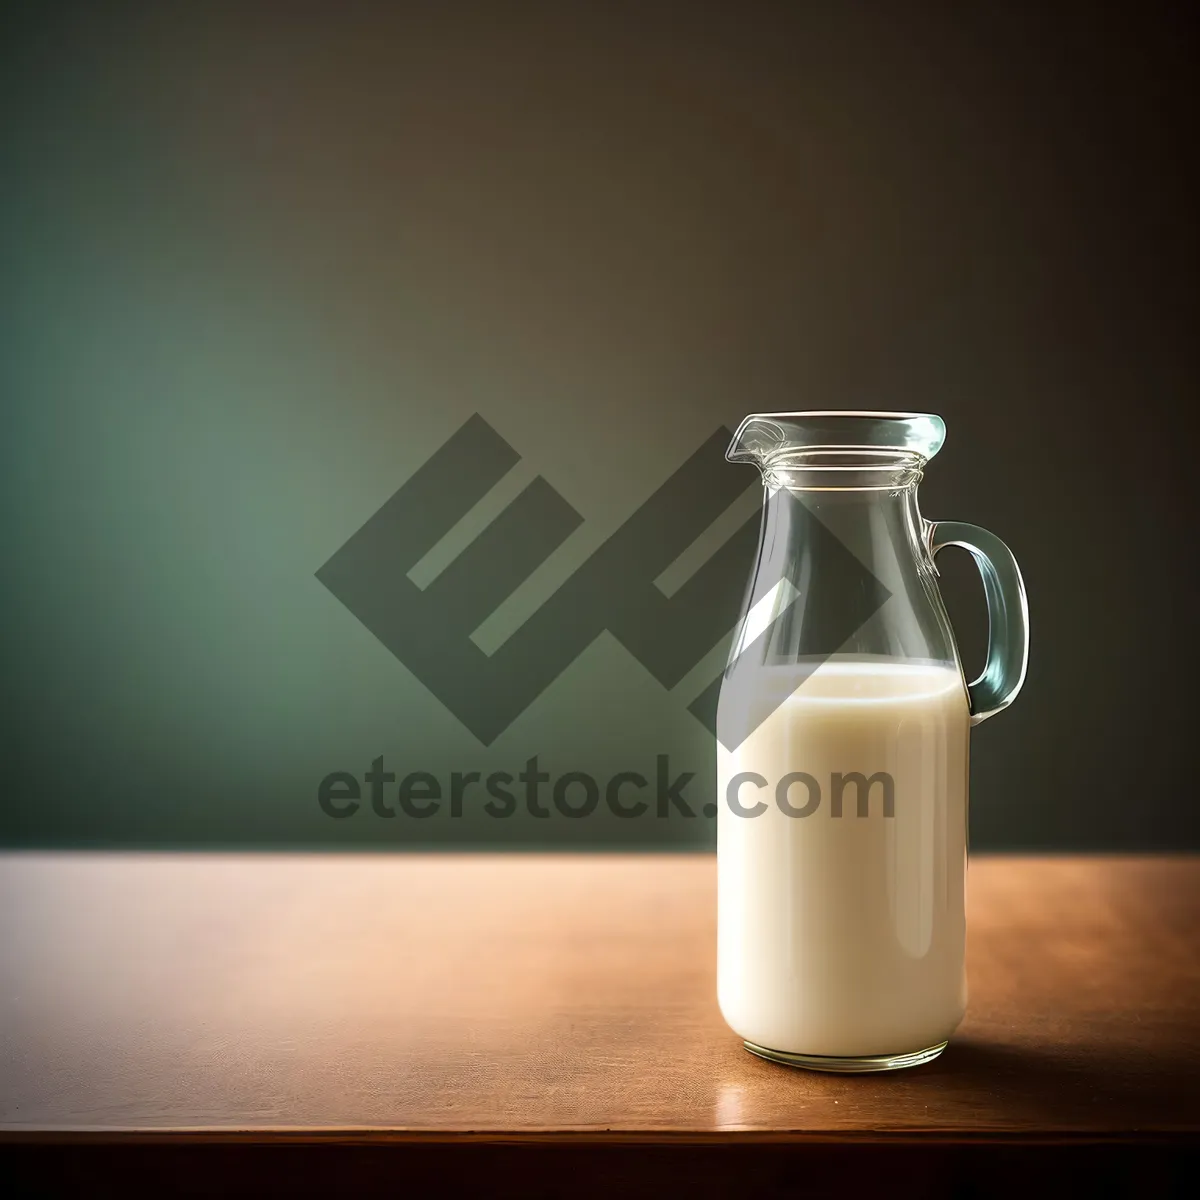 Picture of Refreshingly Pure Milk in Glass Bottle